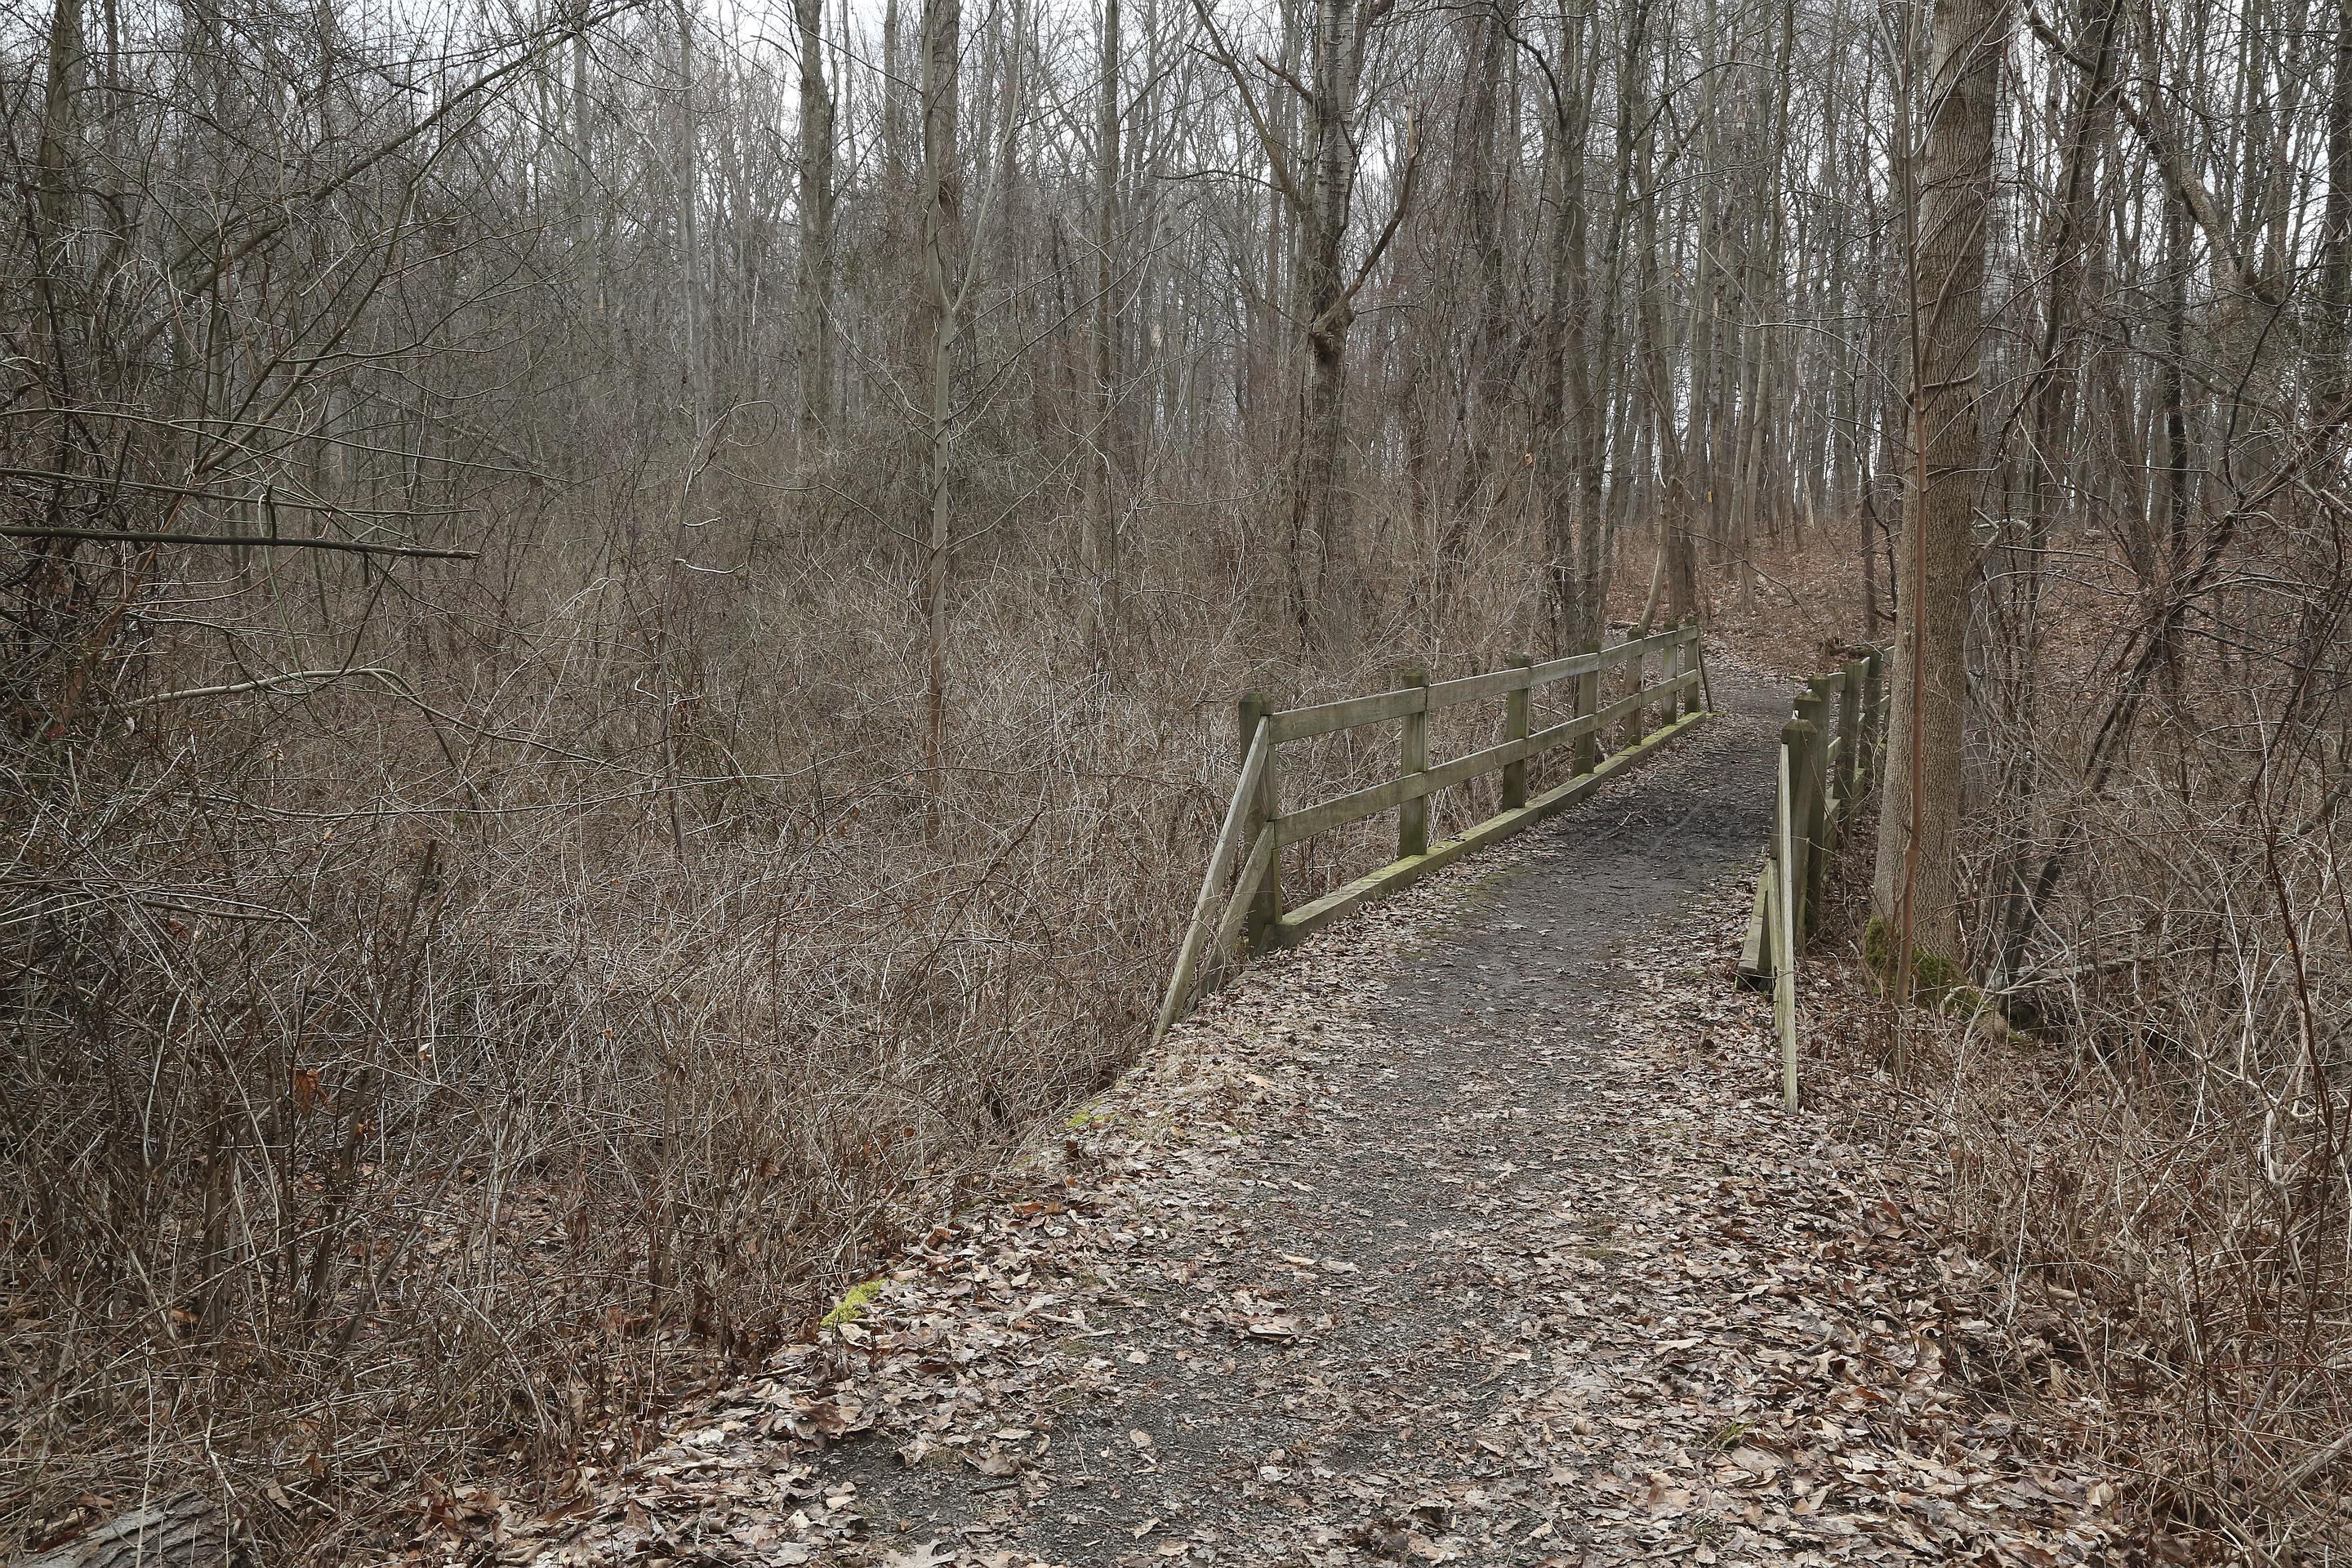 A trial meanders through thick undergrowth and across a bridge. It is an overcast winter day.